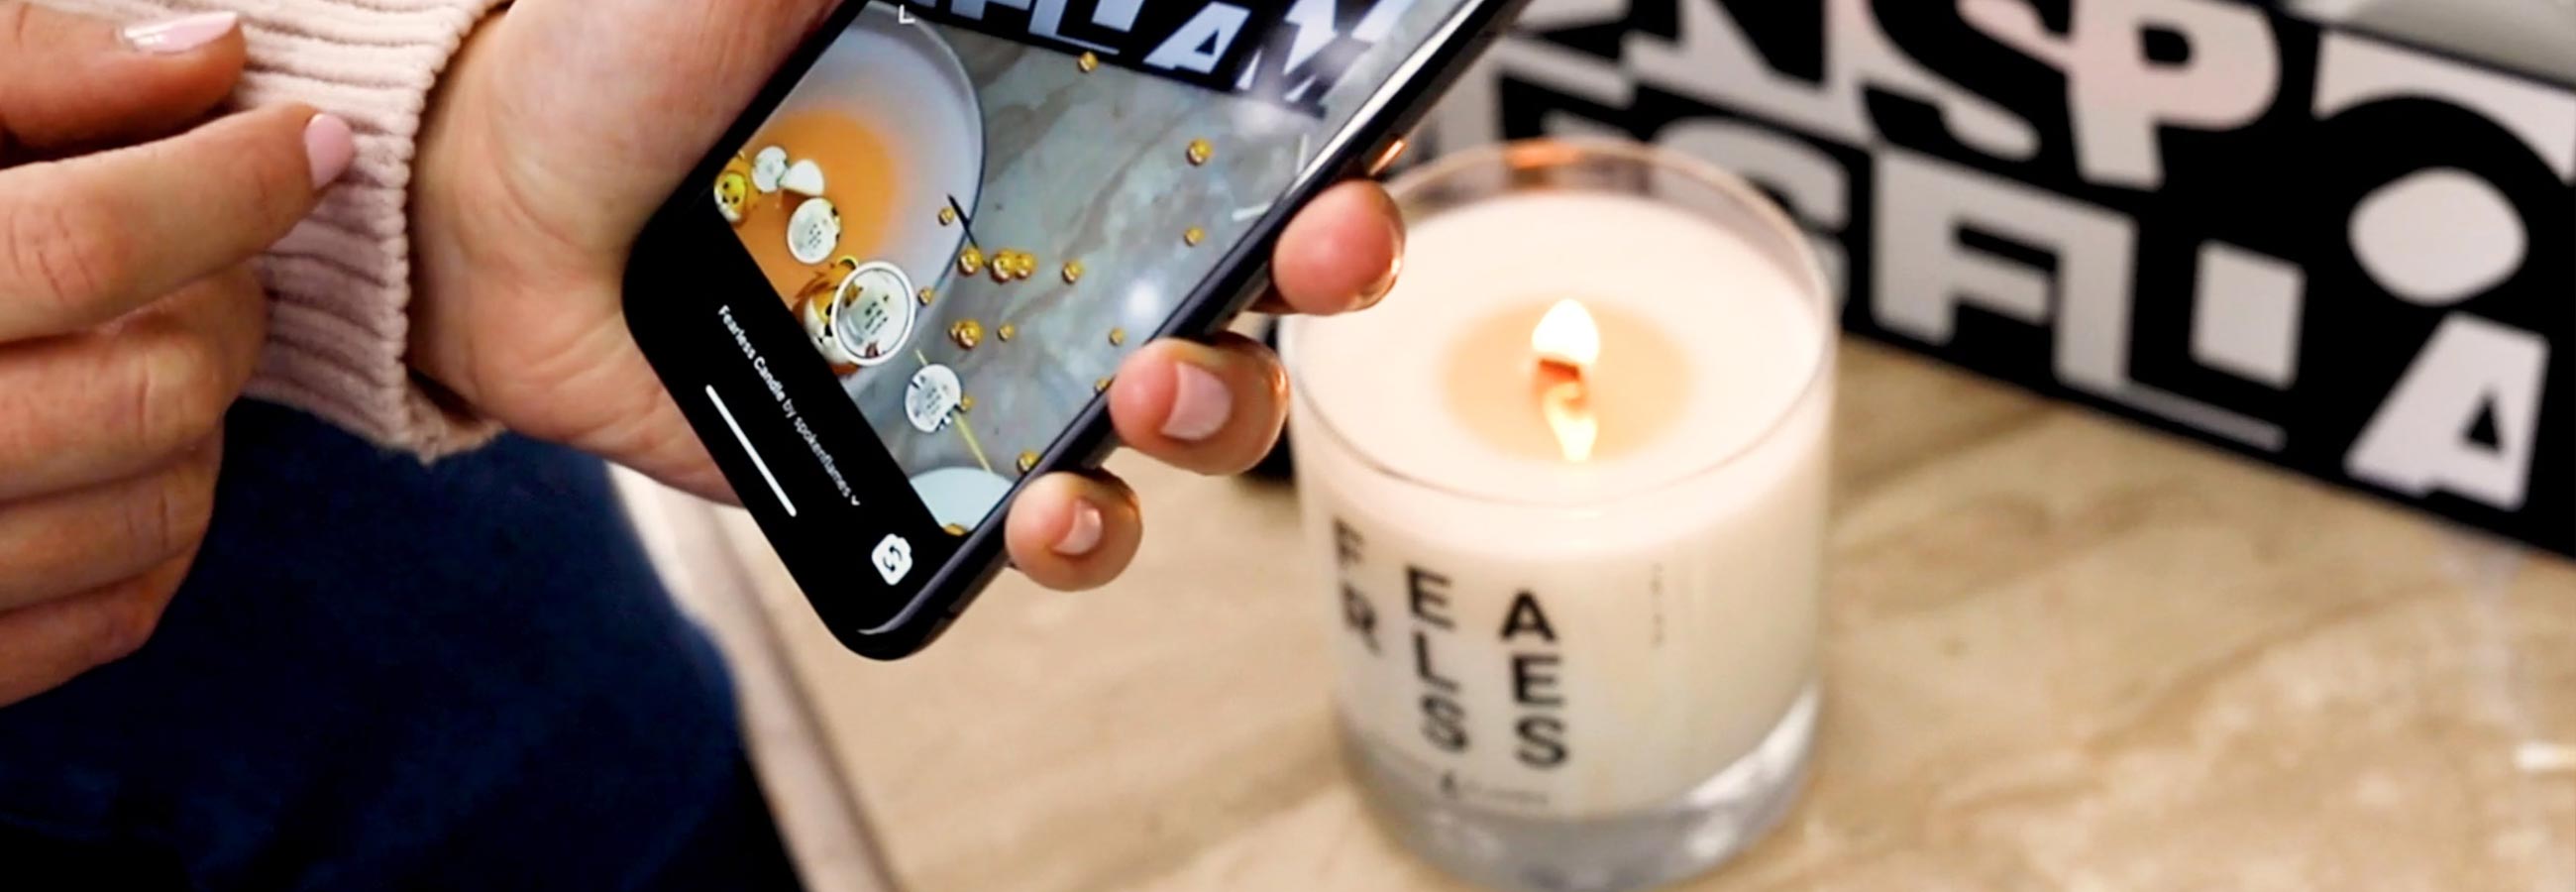 Spoken Flames candles augmented reality feature